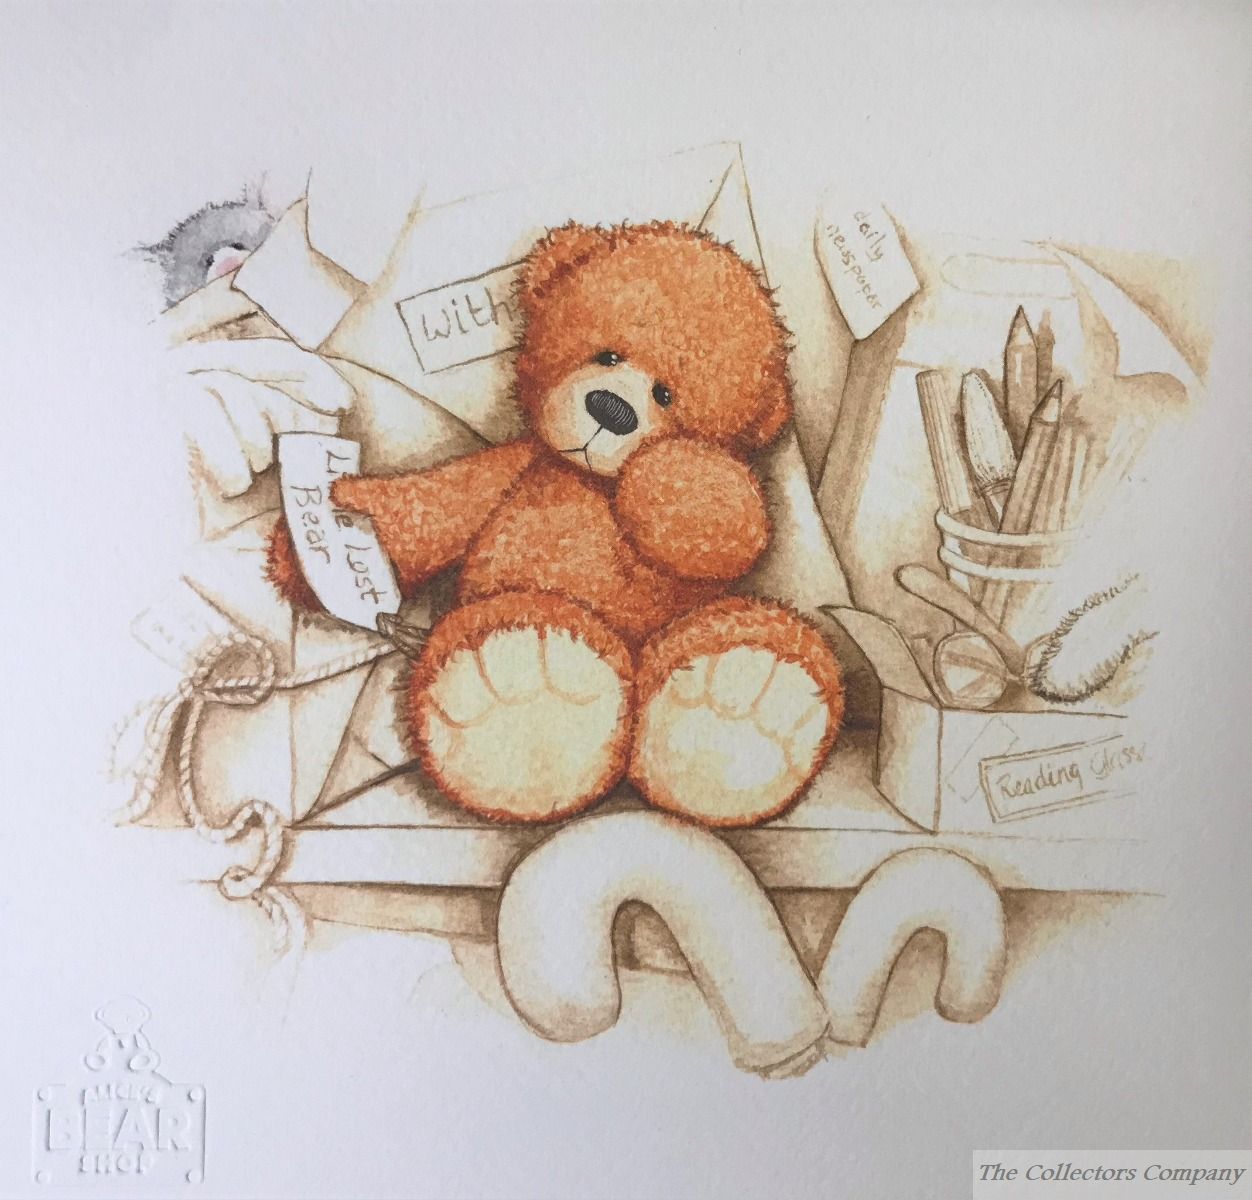 Alice's Bear Shop Illustration of Little Lost Bear from the storybook Little Lost Bear